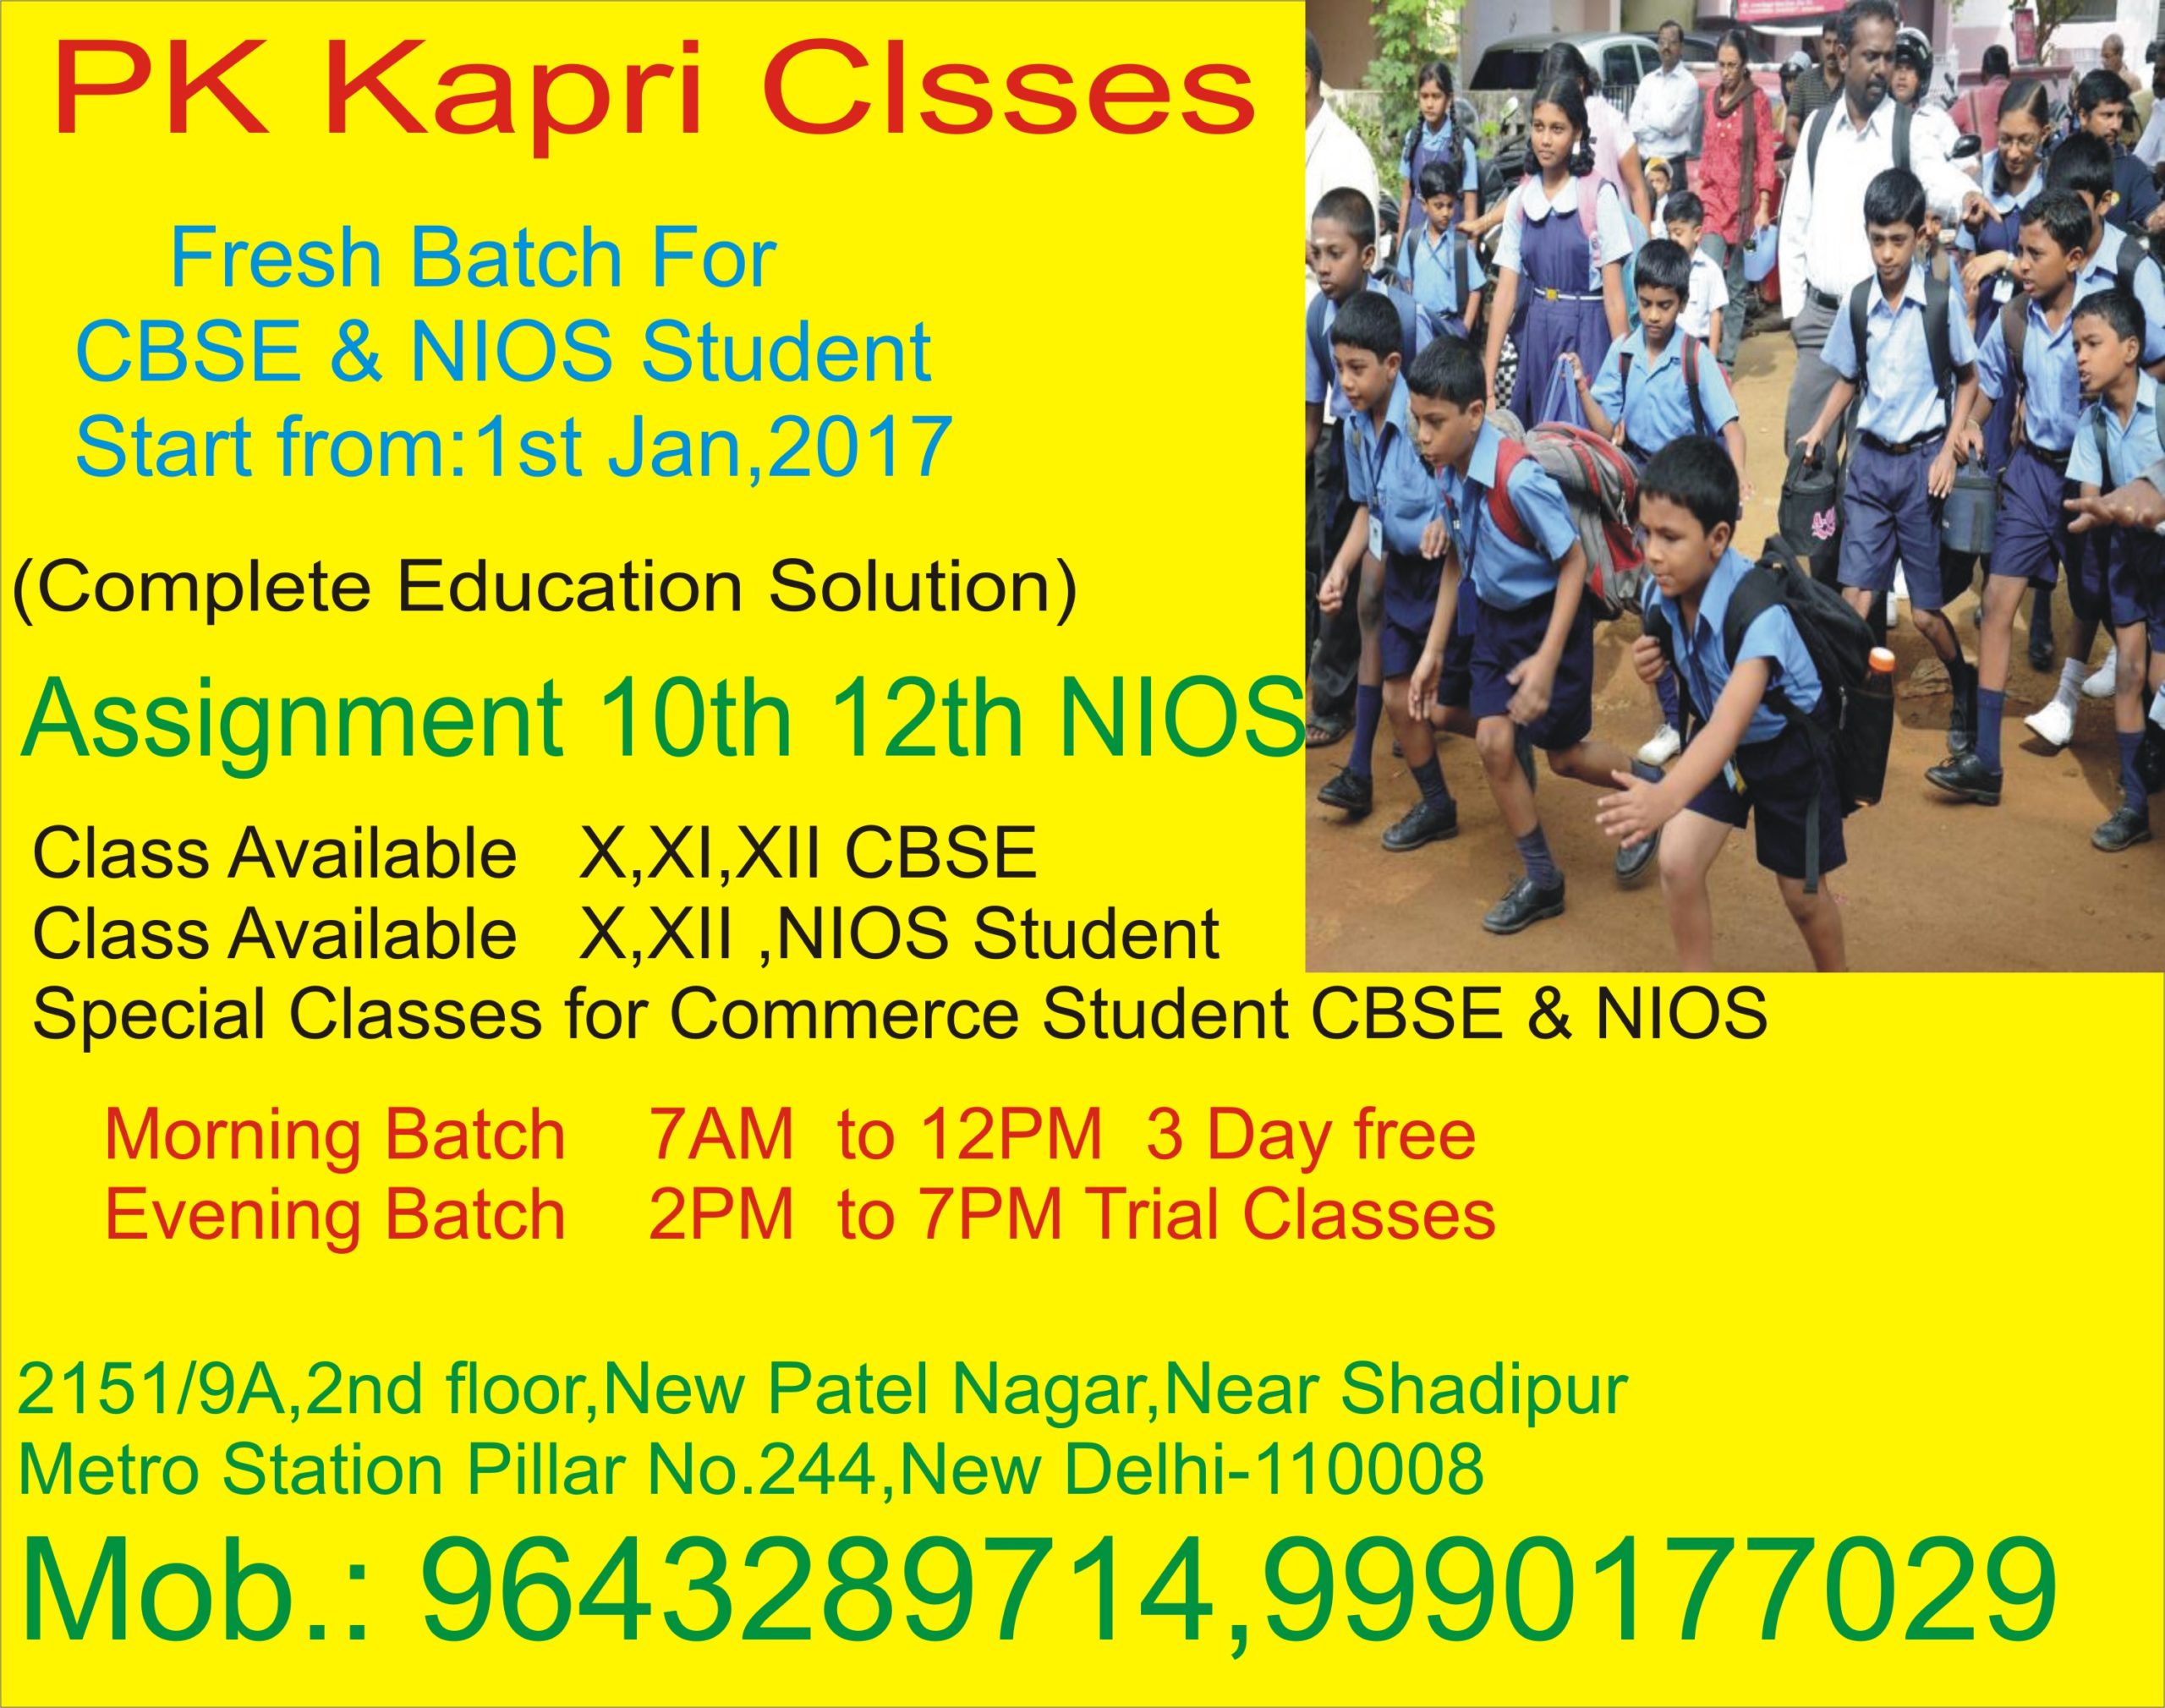 NIOS: NIOS Virtual Open Schooling, Admission, Examination, TMA, Solved Assignment@9643289714 National Institute of Open Schooling (NIOS) Tutor Marked Assignments for Secondary and Senior Secondary Course @9643289714